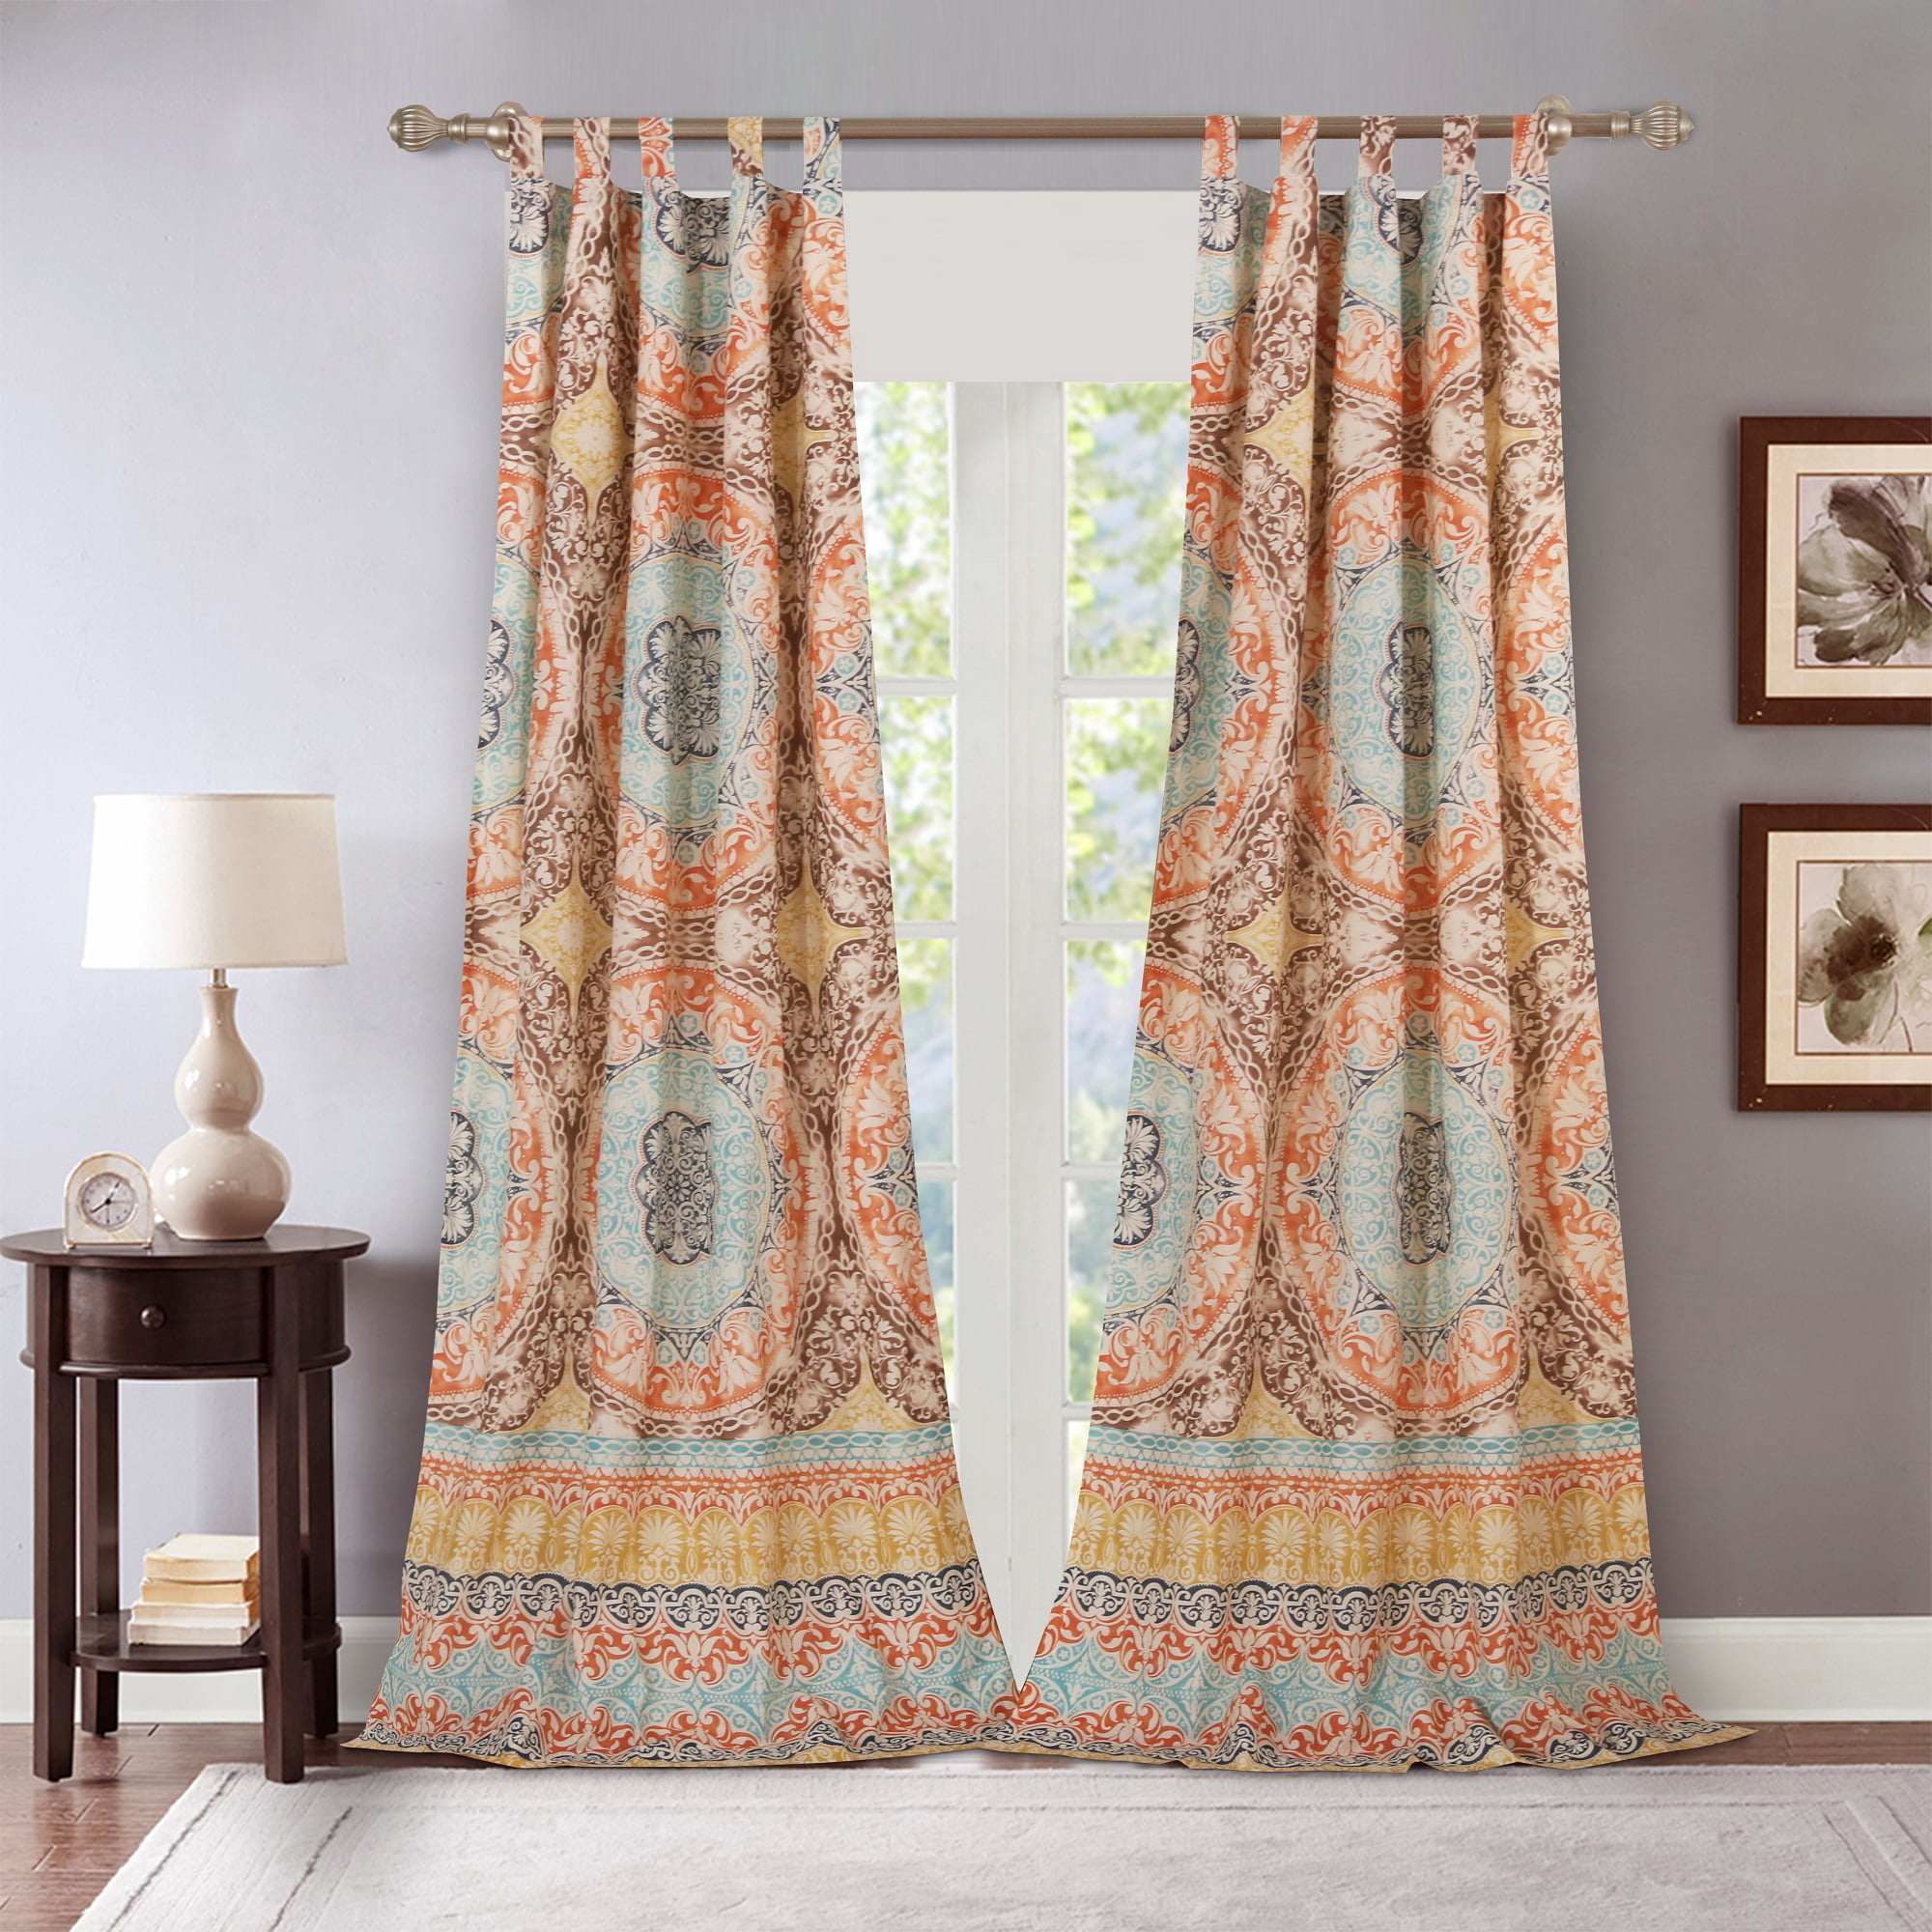 boho curtains in a living room